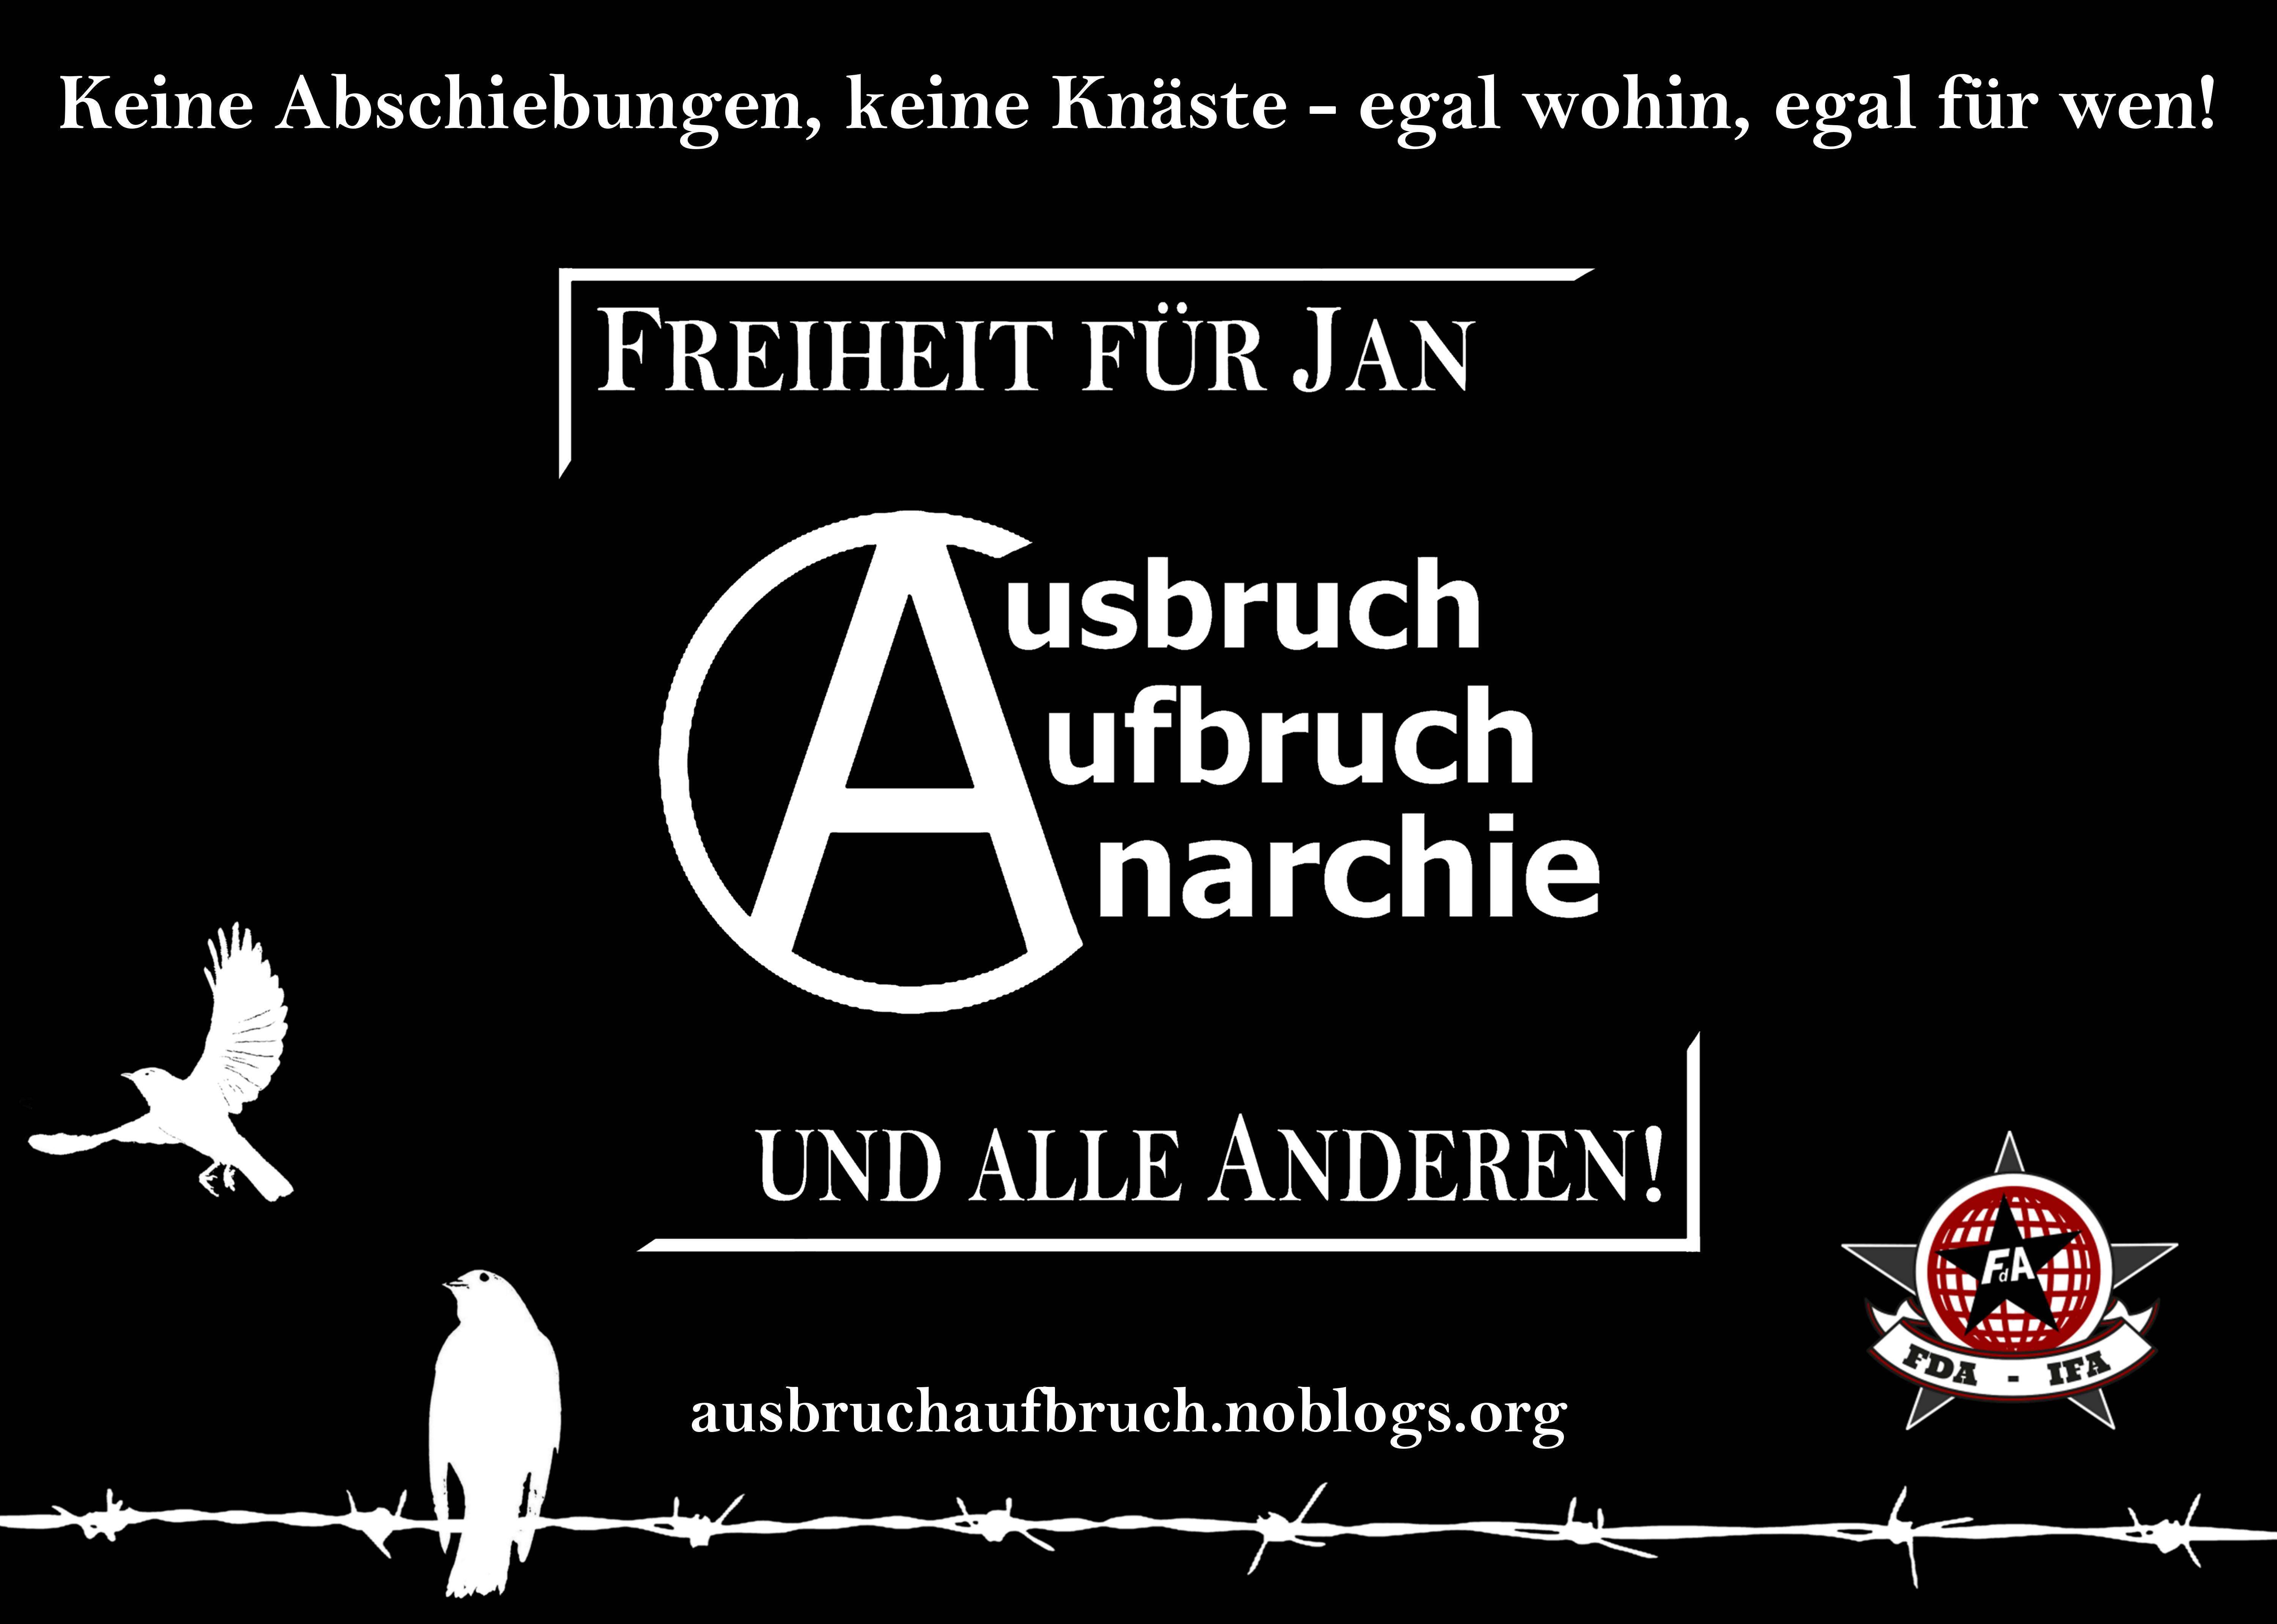 Nuremberg, Germany: Campaign *Escape.Departure.Anarchy* – Freedom for Jan and everyone else